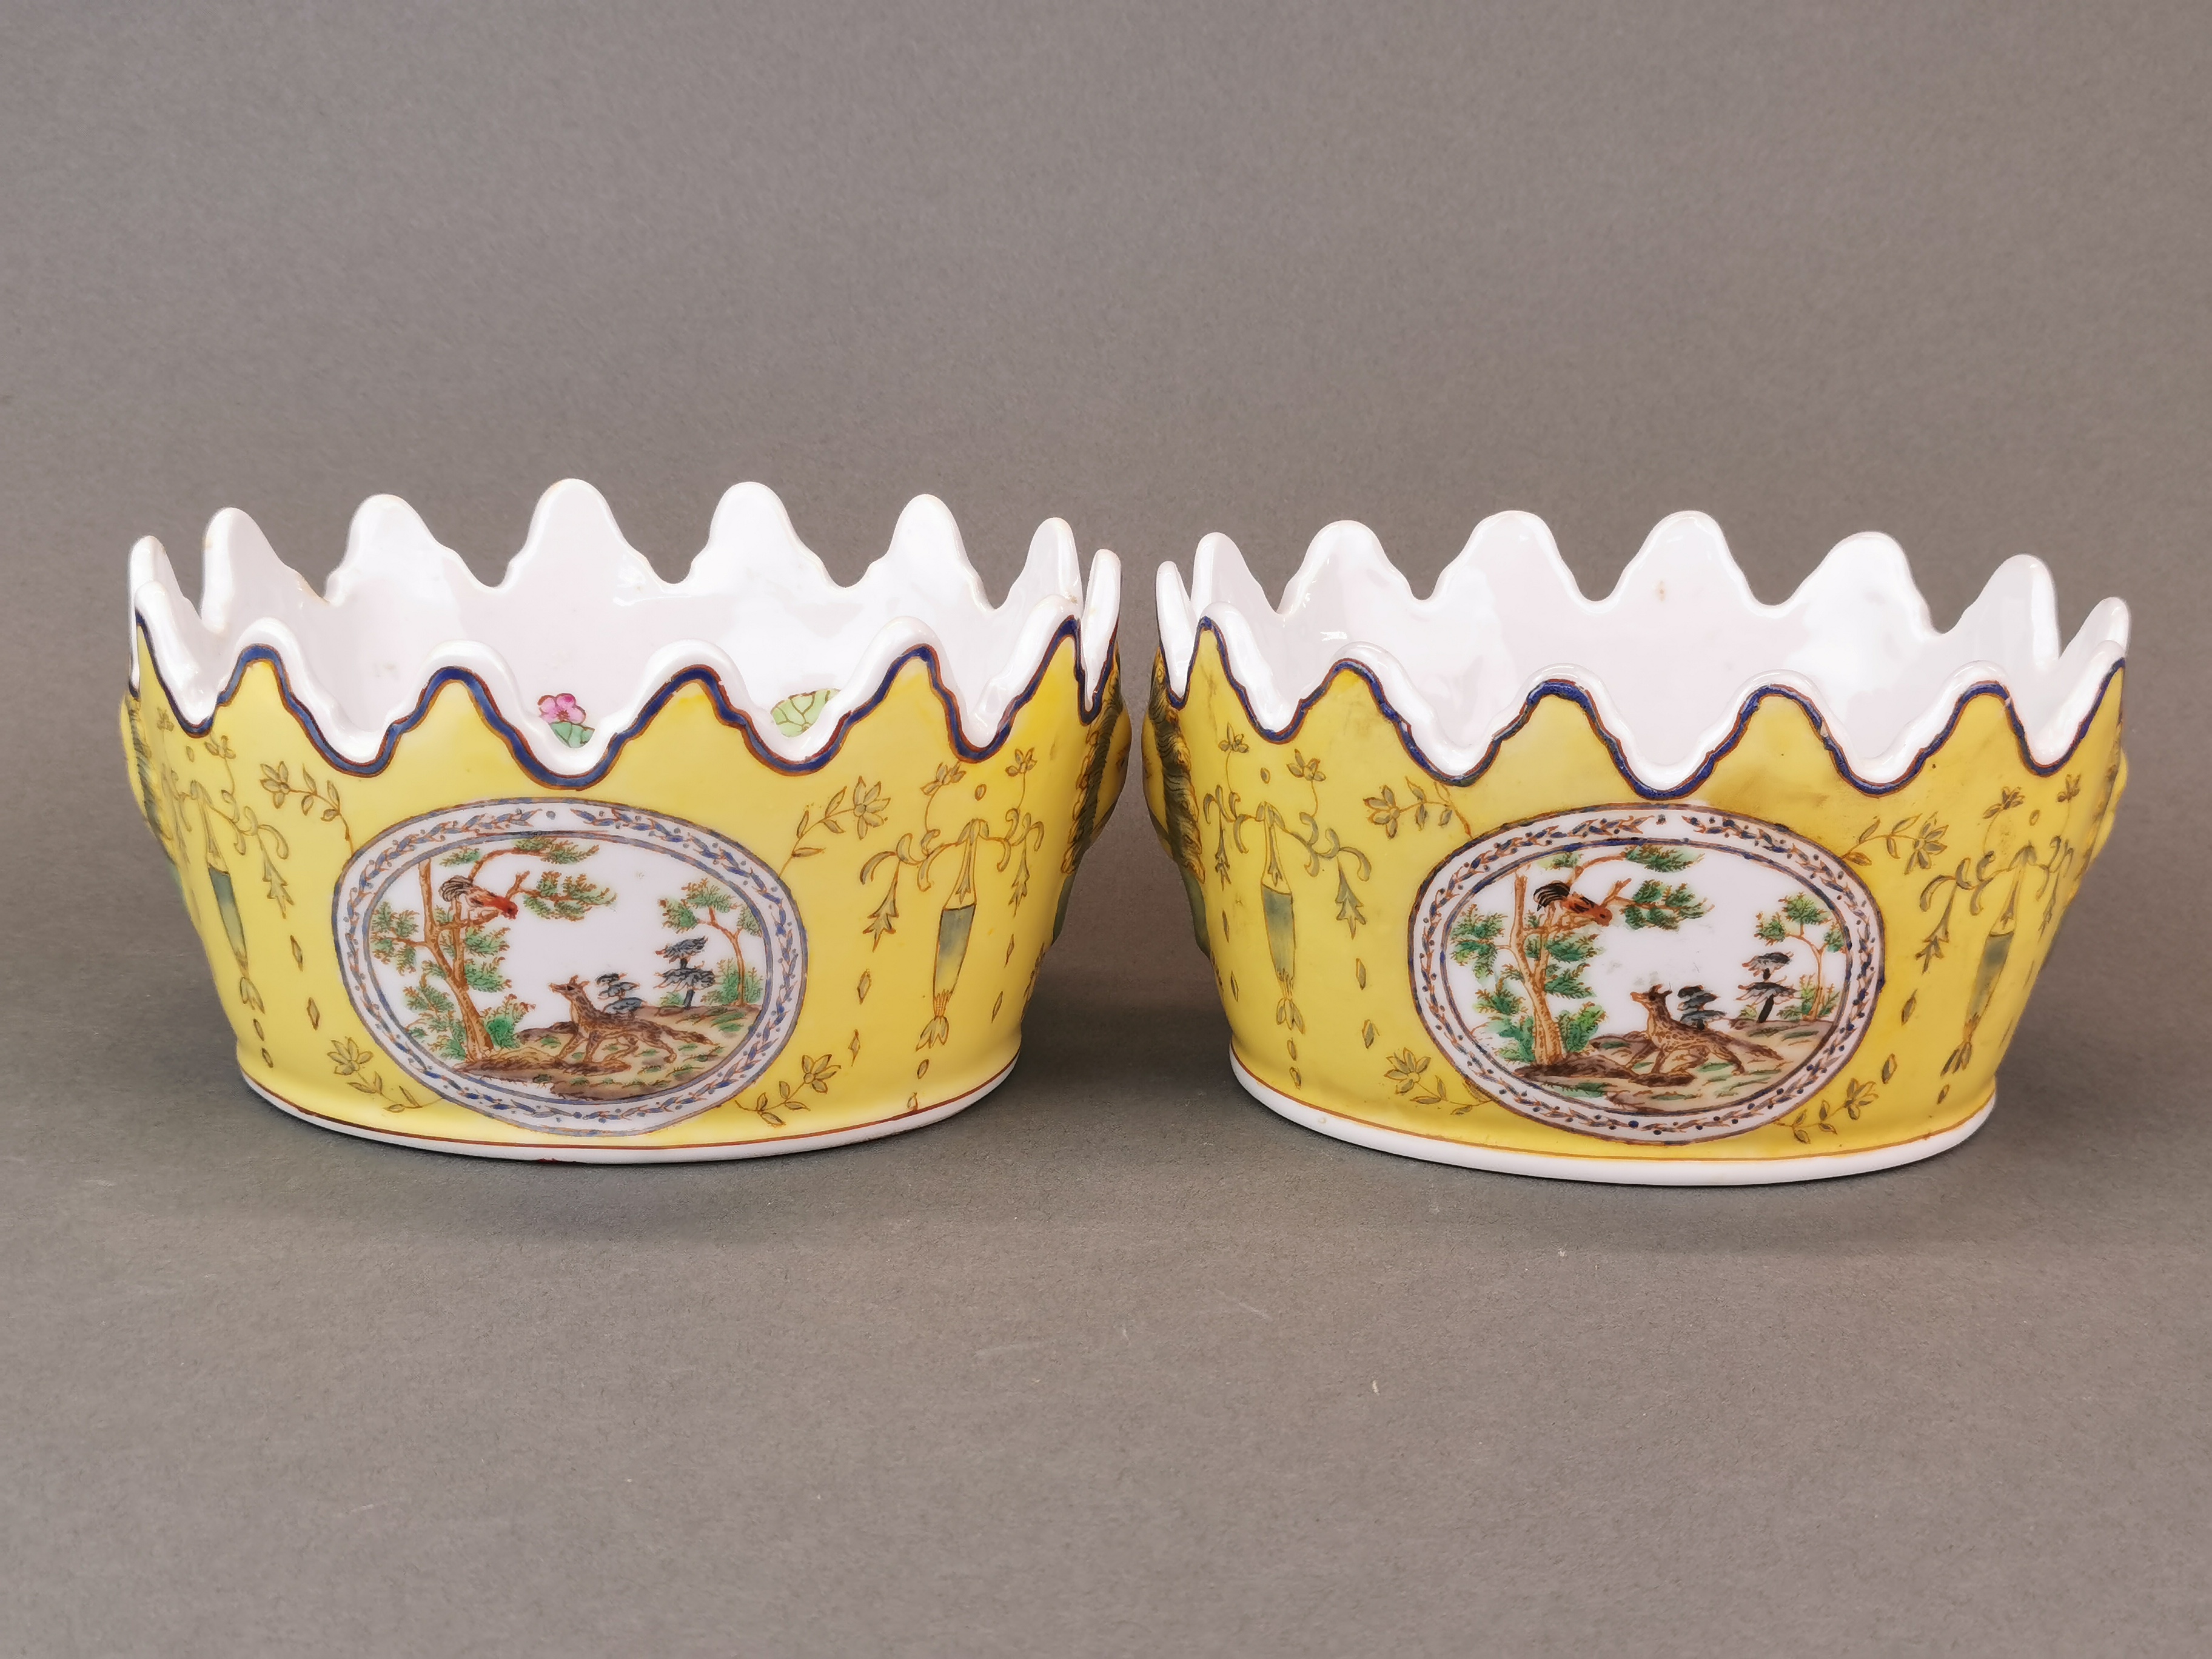 A pair of Chinese hand painted export porcelain wine glass coolers, W. 18cm. H. 9cm.